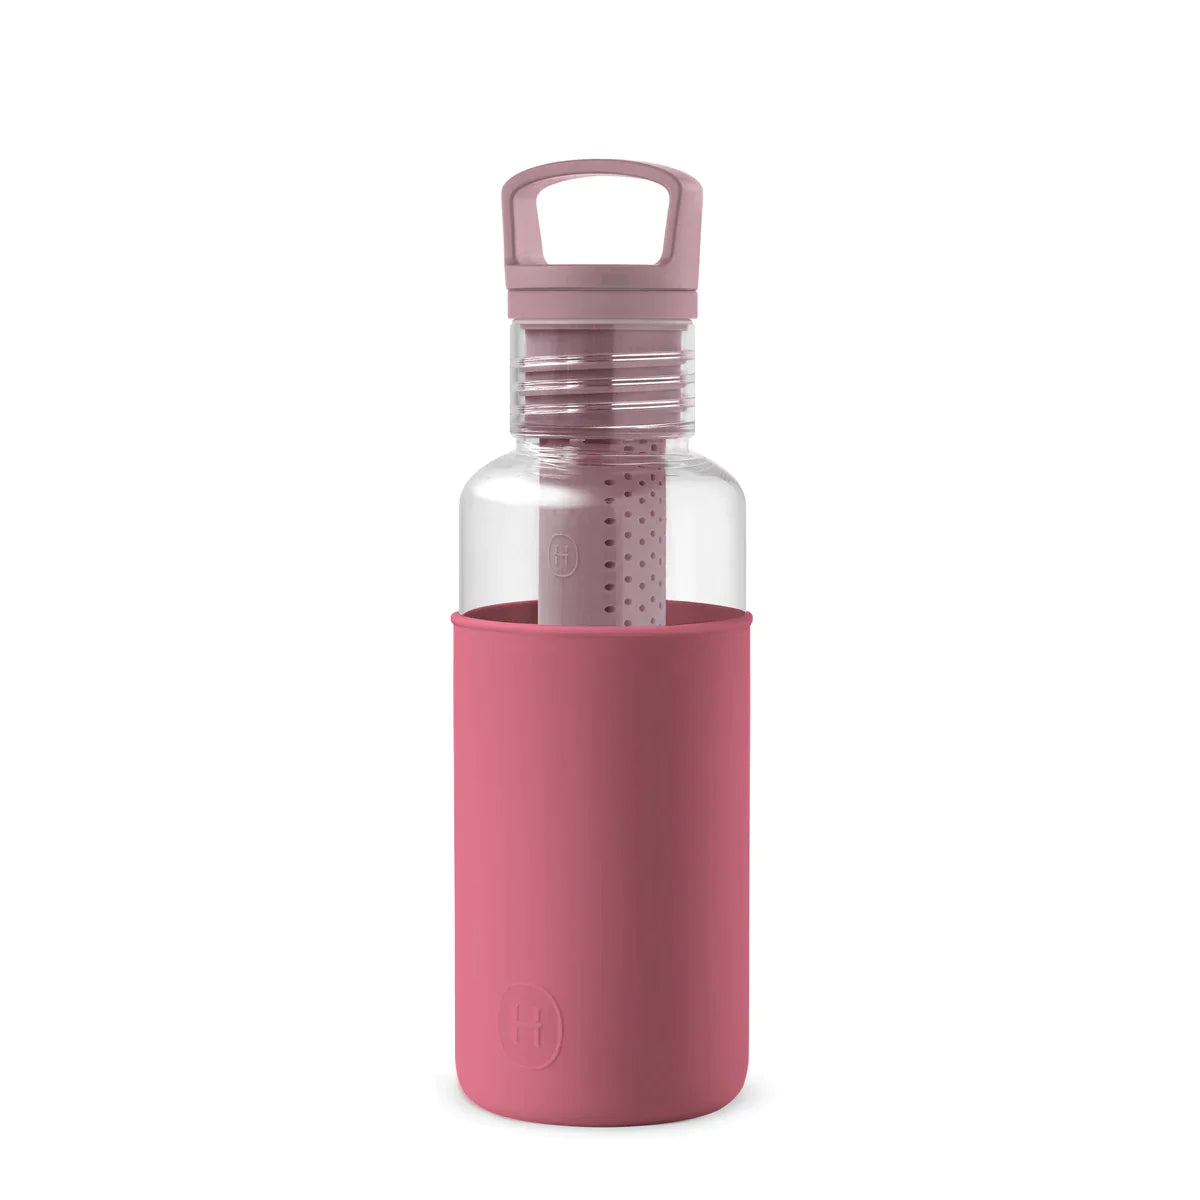 The Benefits of Using Reusable Water Bottles with Infuser